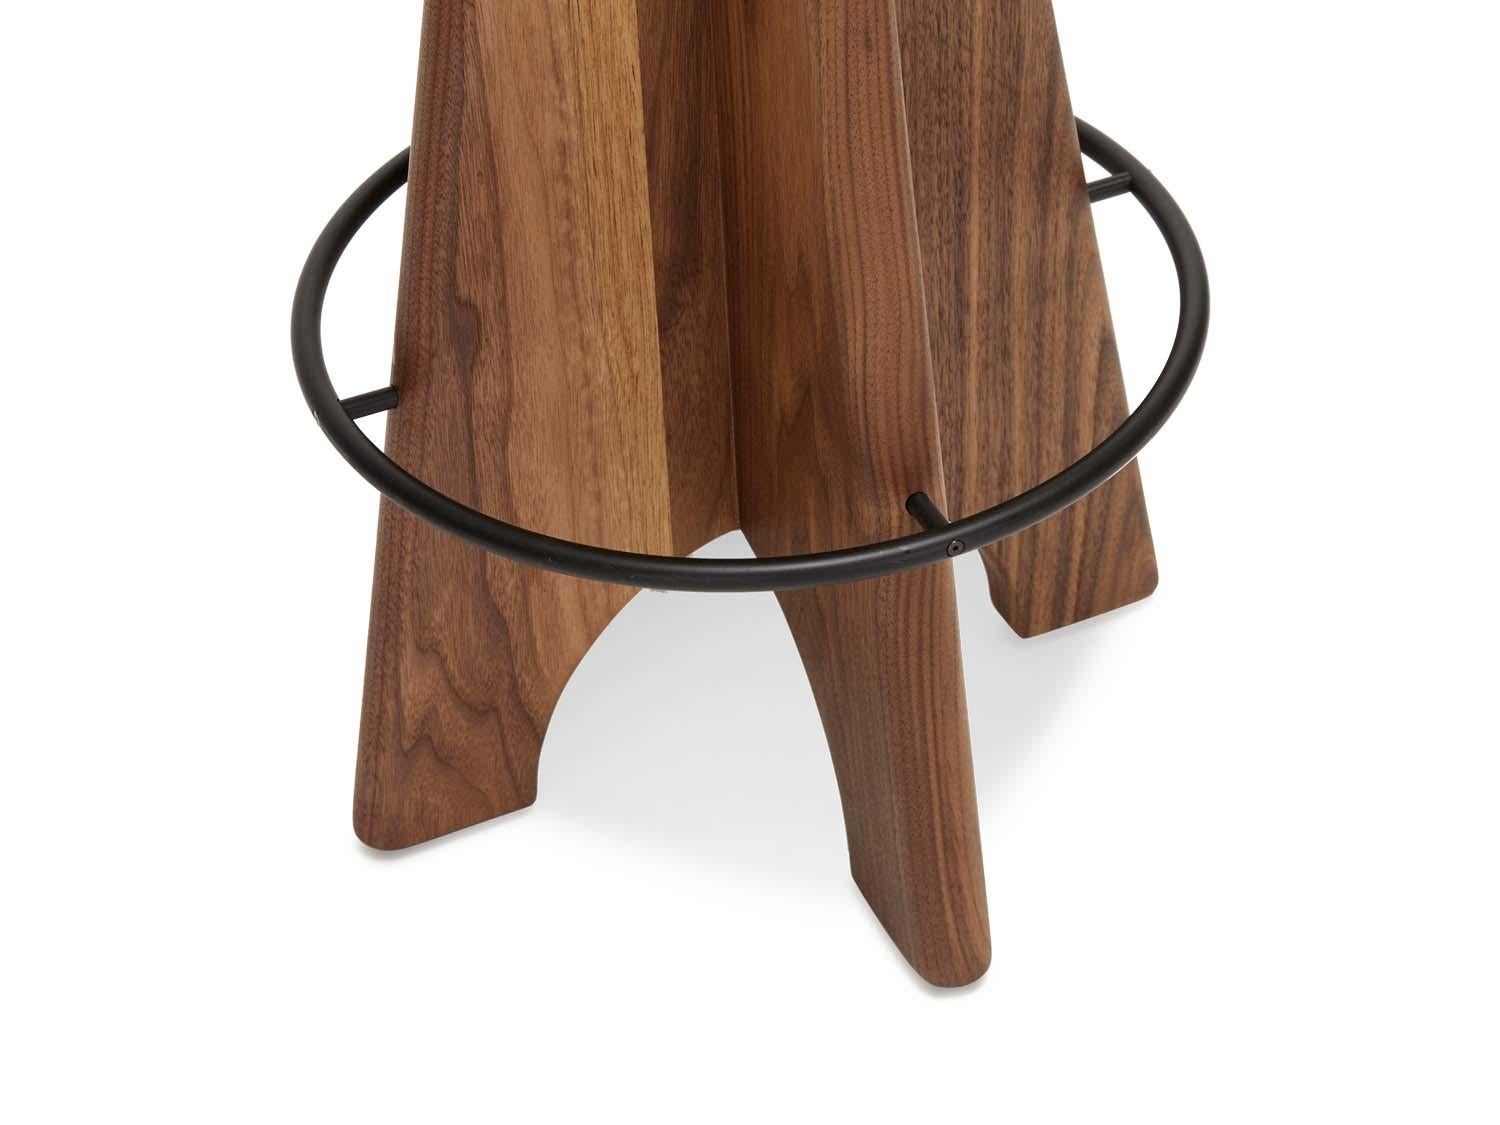 The Ojai Barstool features a sculptural wood base, powdercoated metal footrest and an upholstered seat.

The Lawson-Fenning Collection is designed and handmade in Los Angeles, California.
Reach out to discover what options are currently in